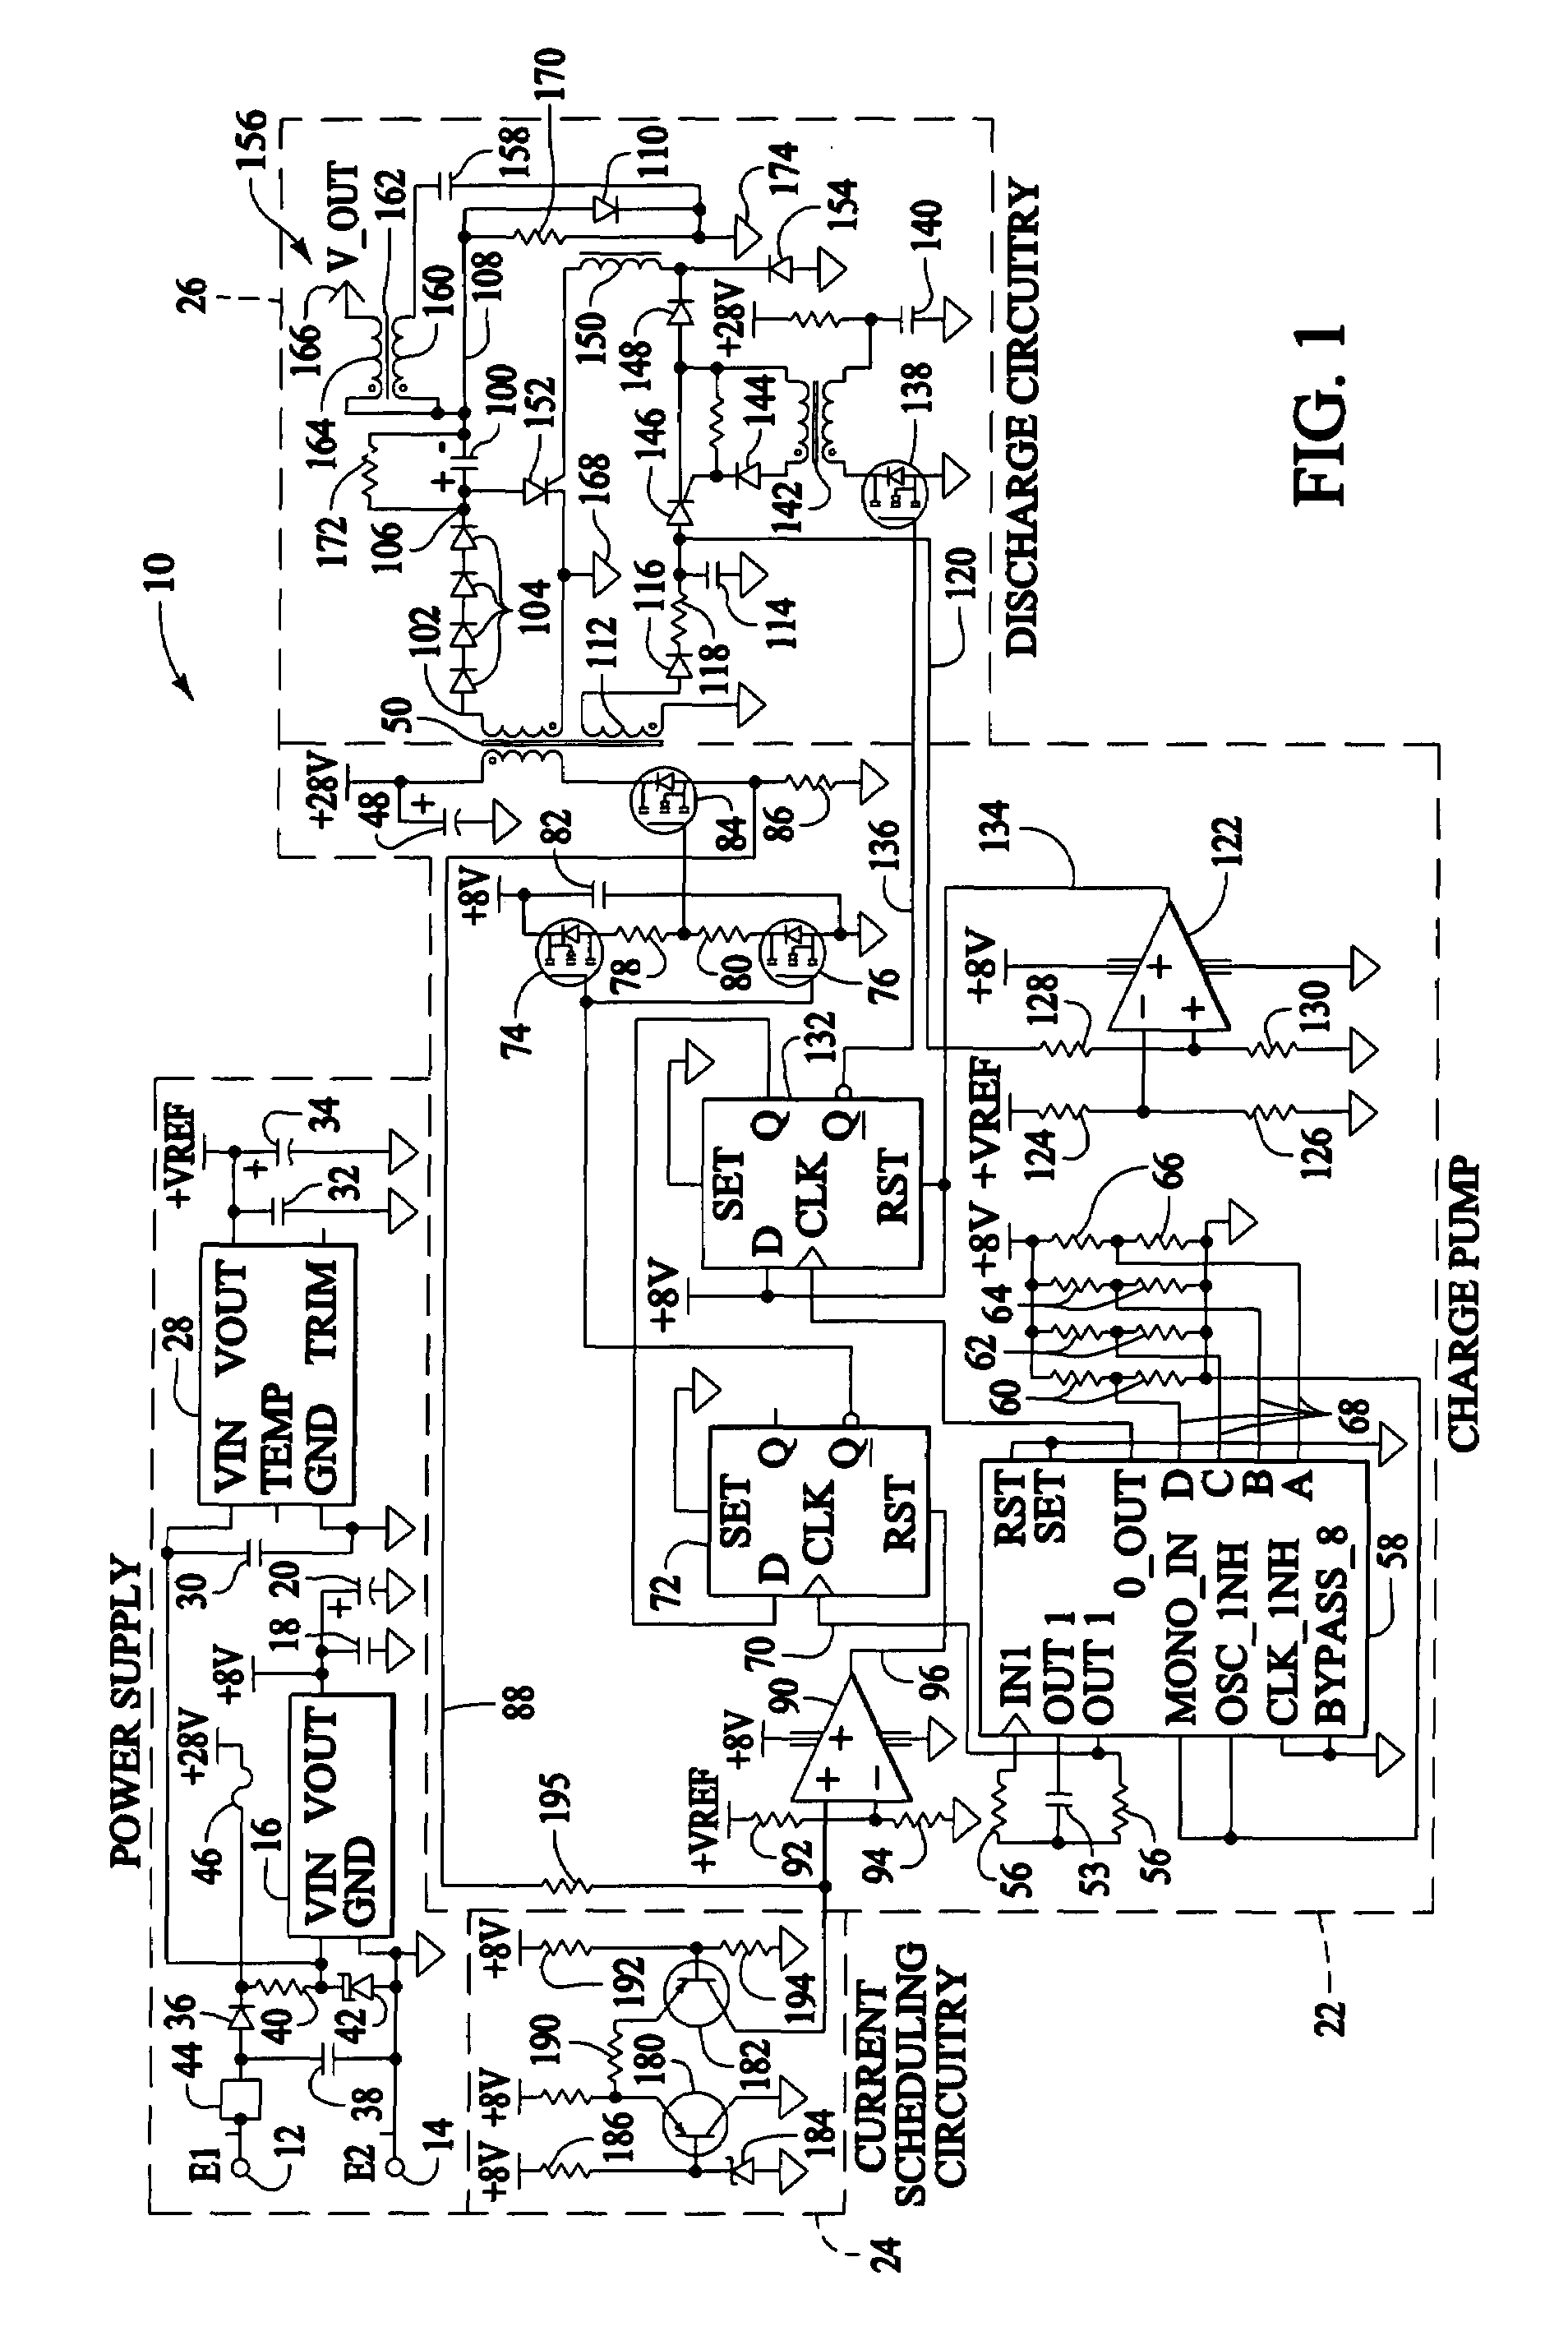 Solid state turbine engine ignition exciter having elevated temperature operational capability